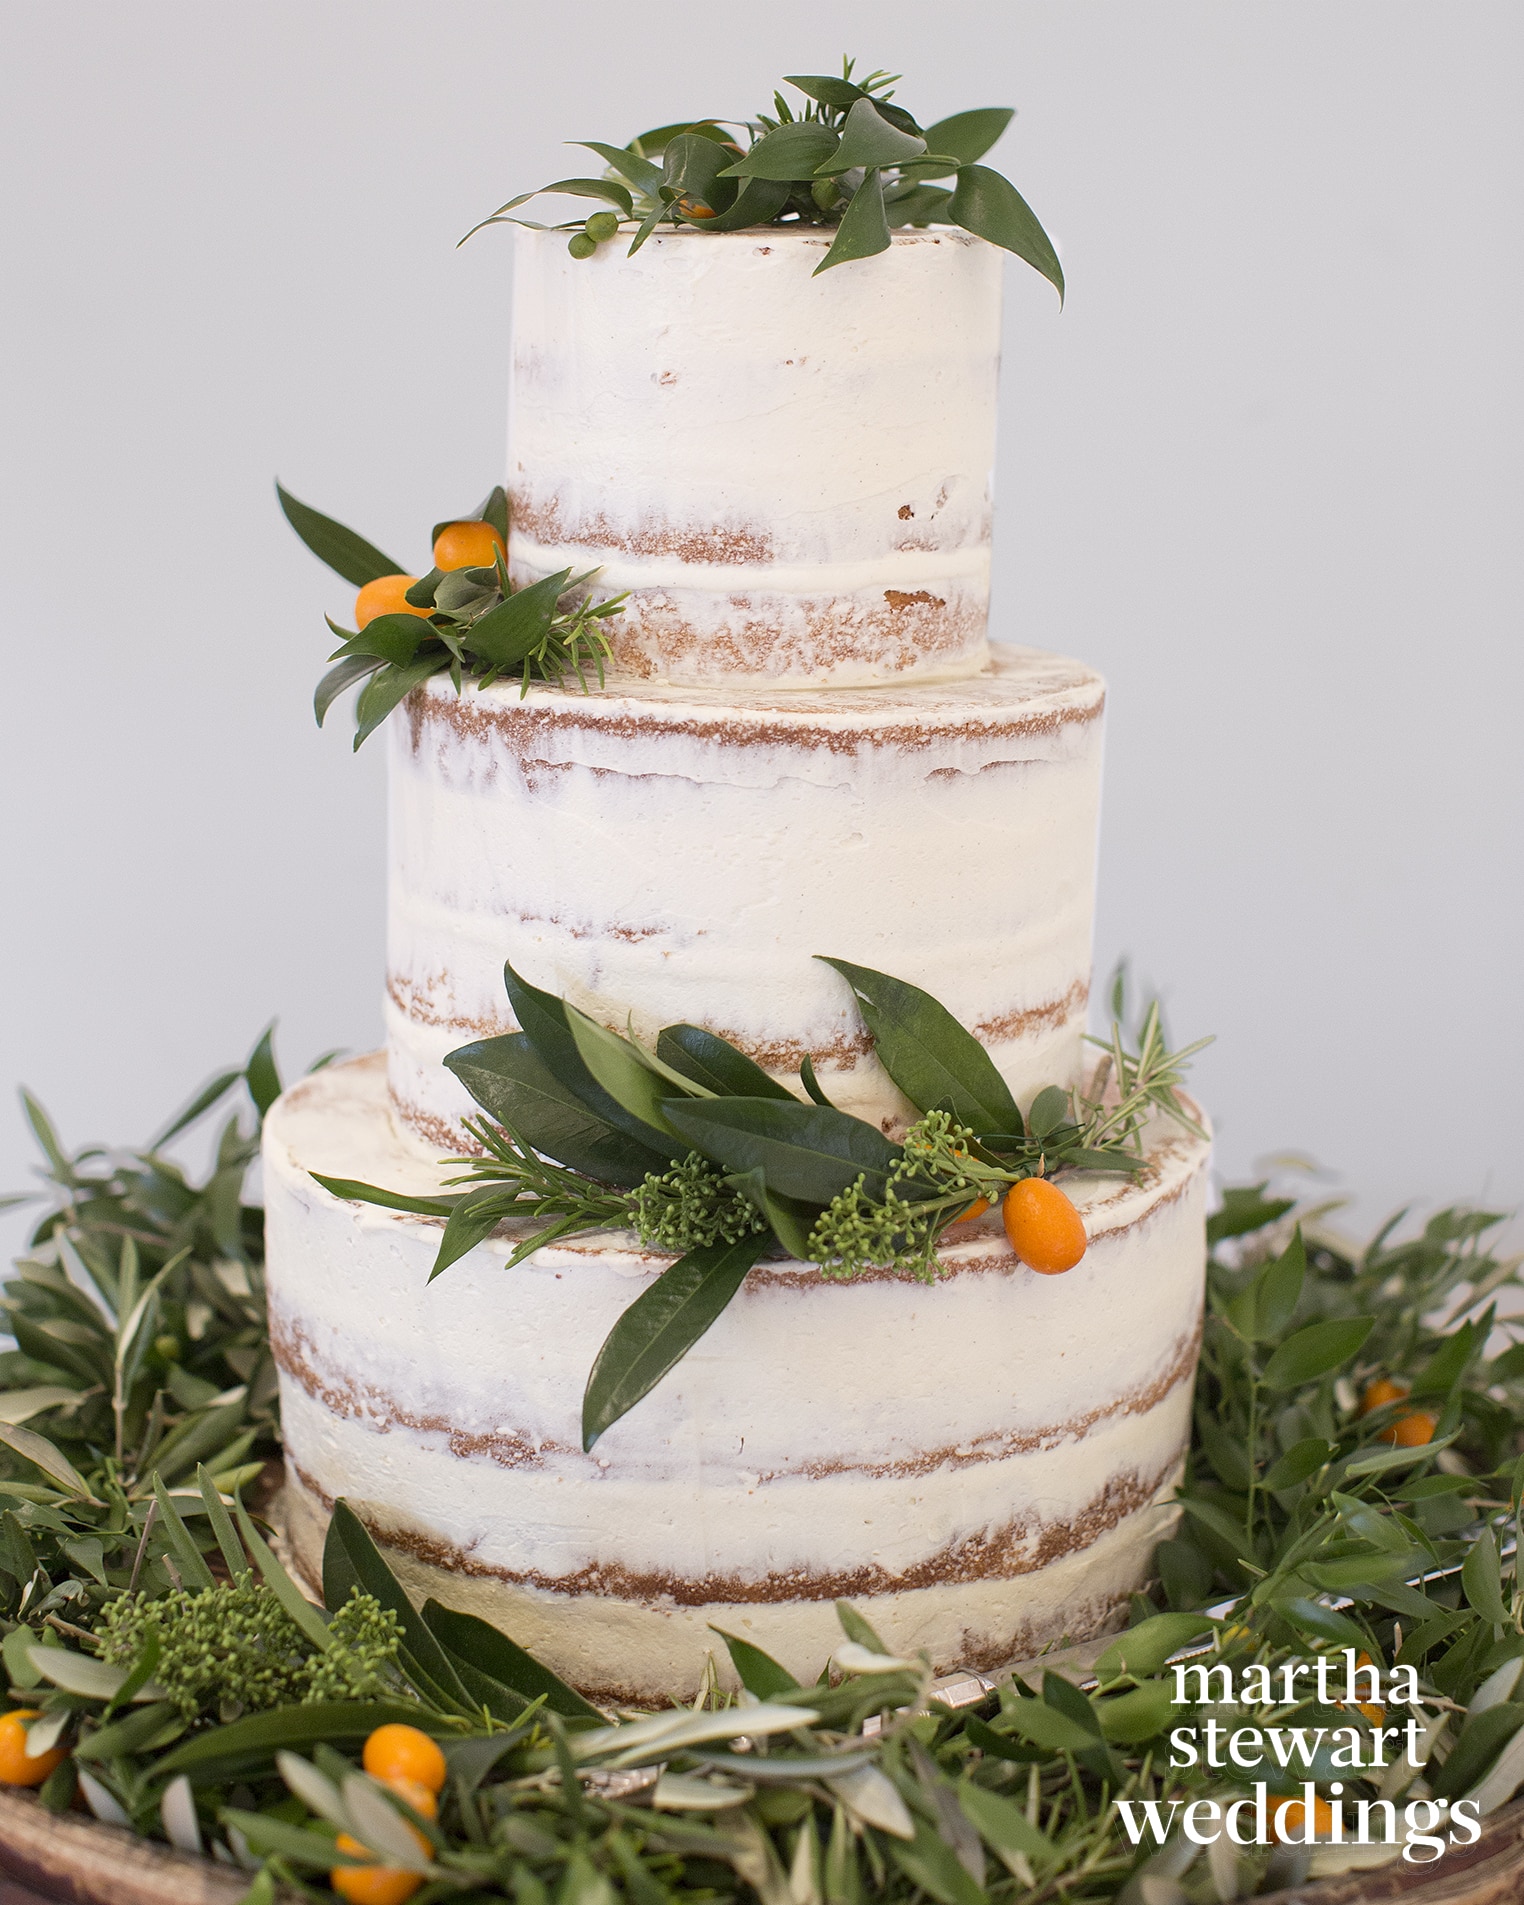 Bridal 101: How To Choose Your Dream Wedding Cake!